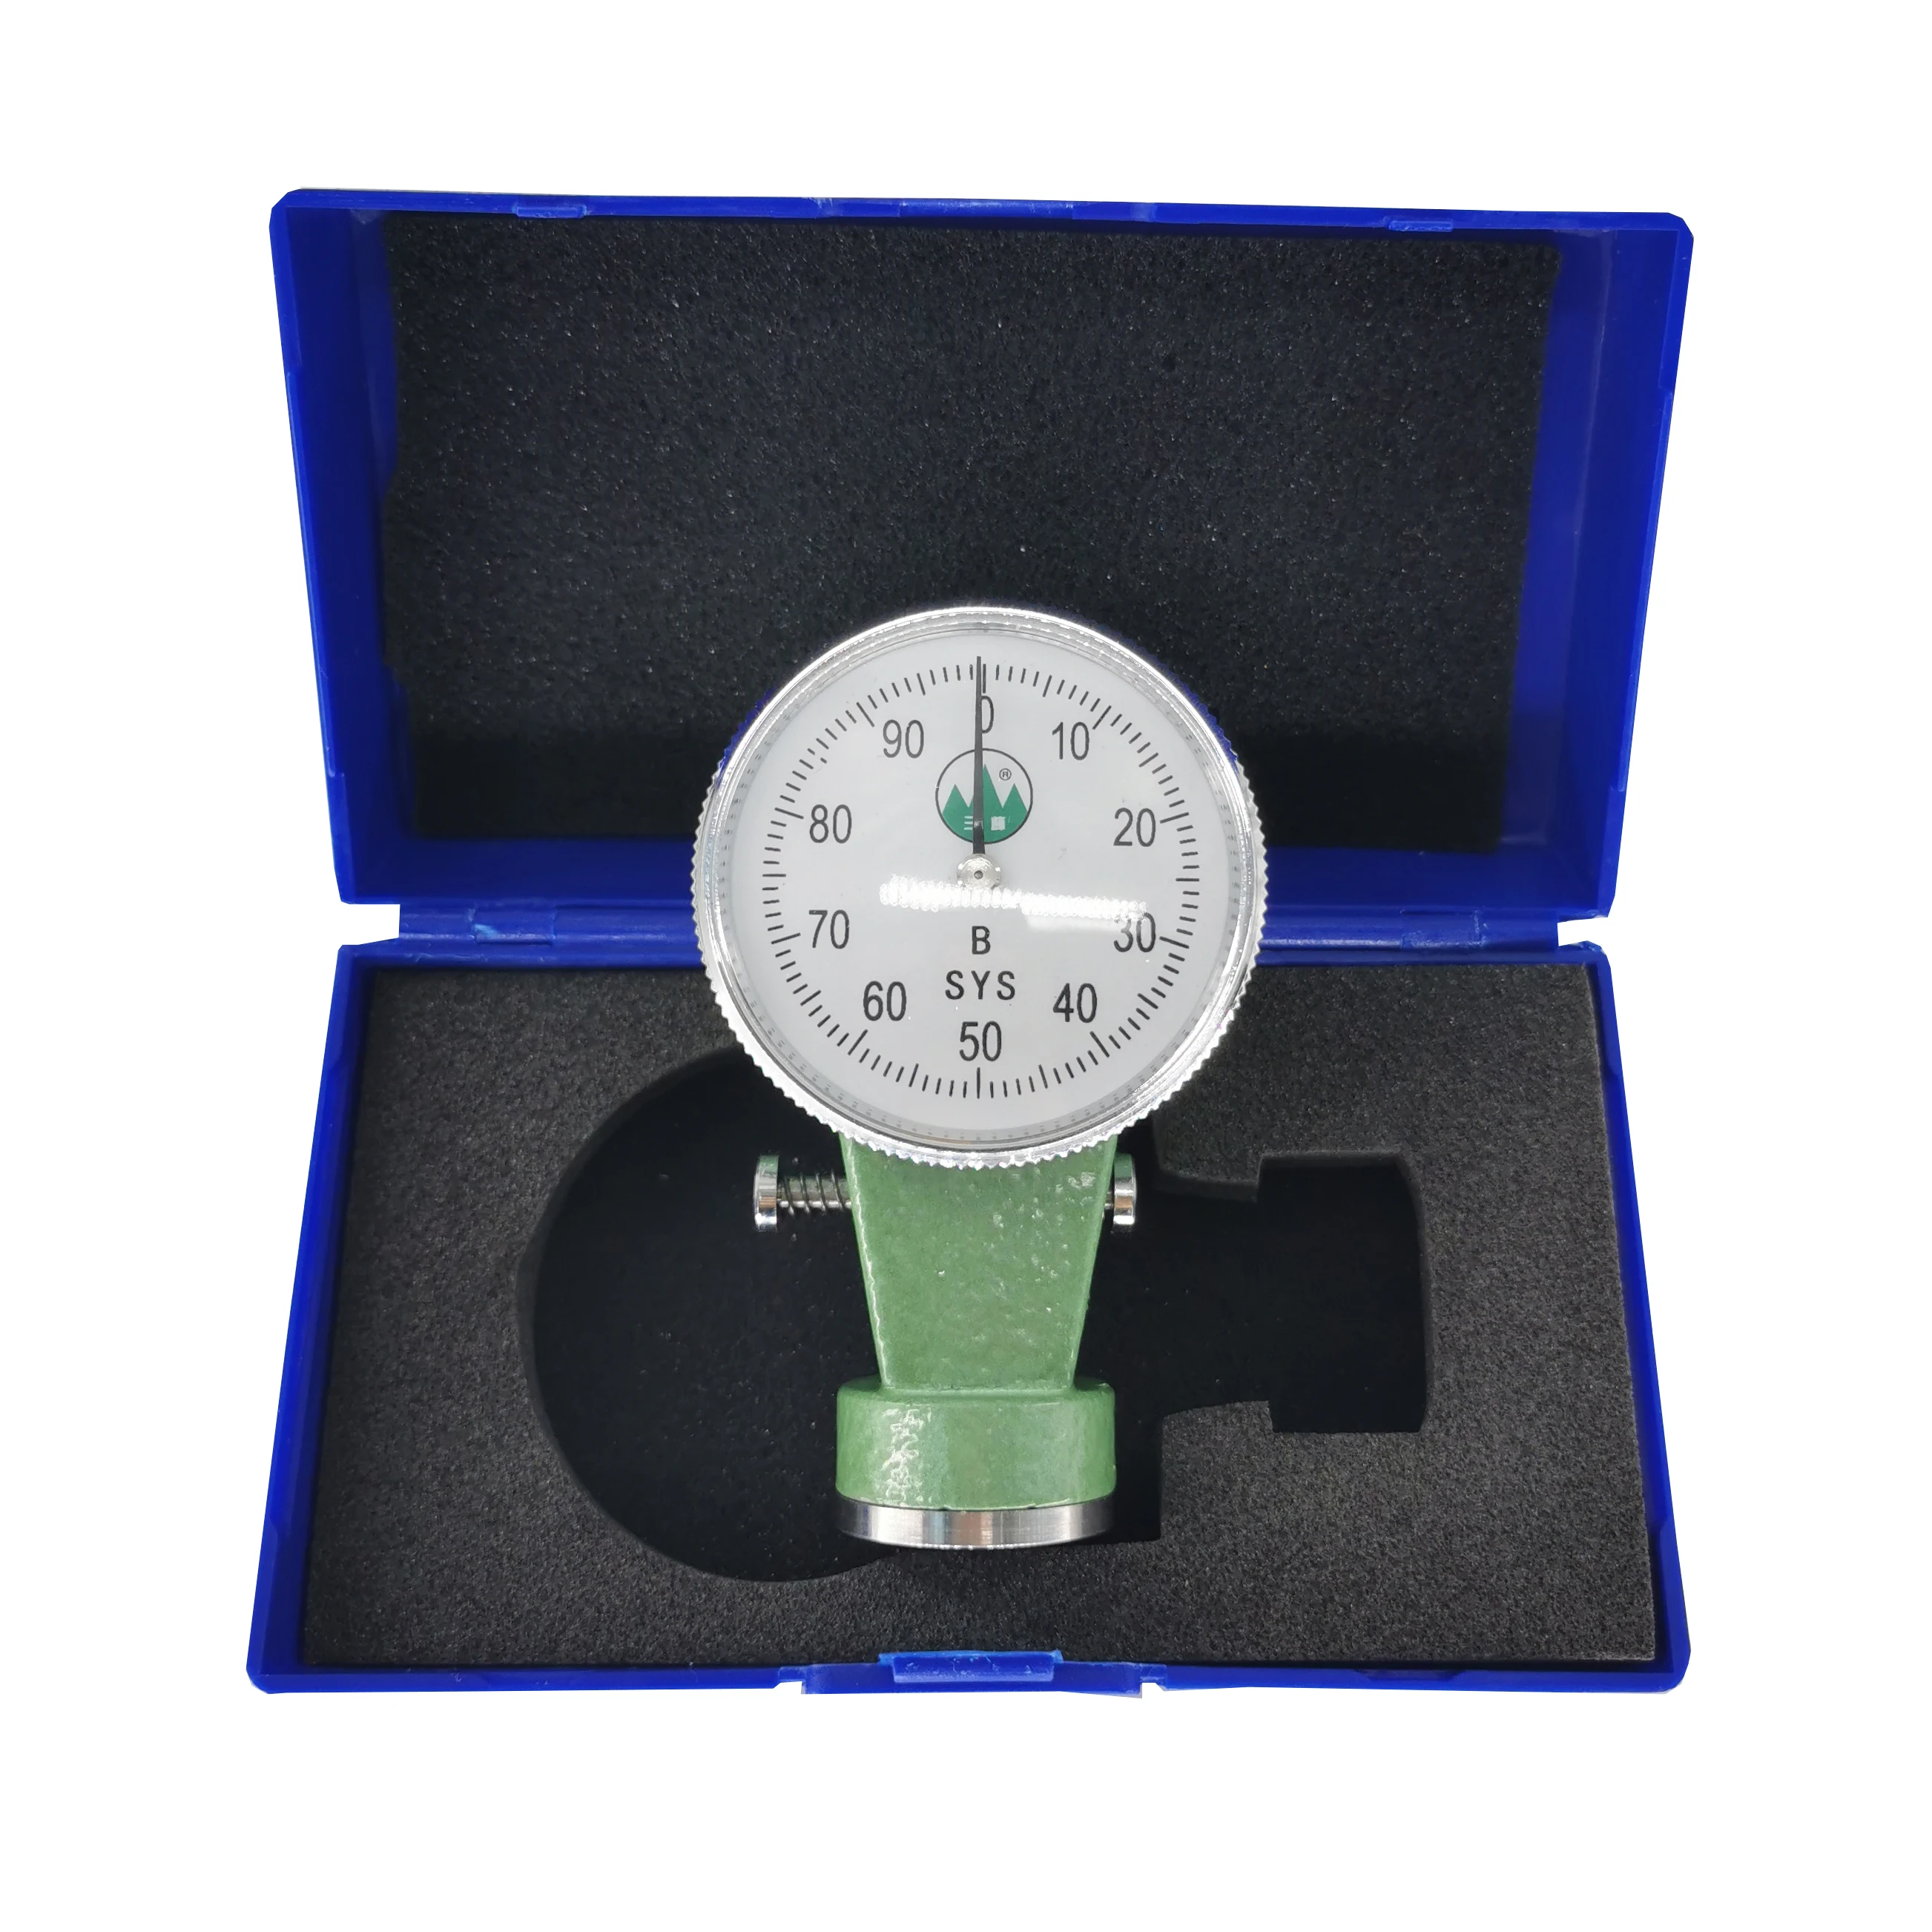 

Wet Sand Mold Surface Hardness Tester Meter Peak Tester With Compression Stroke 2.50mm Maximum Load 980G For Coarse Sand